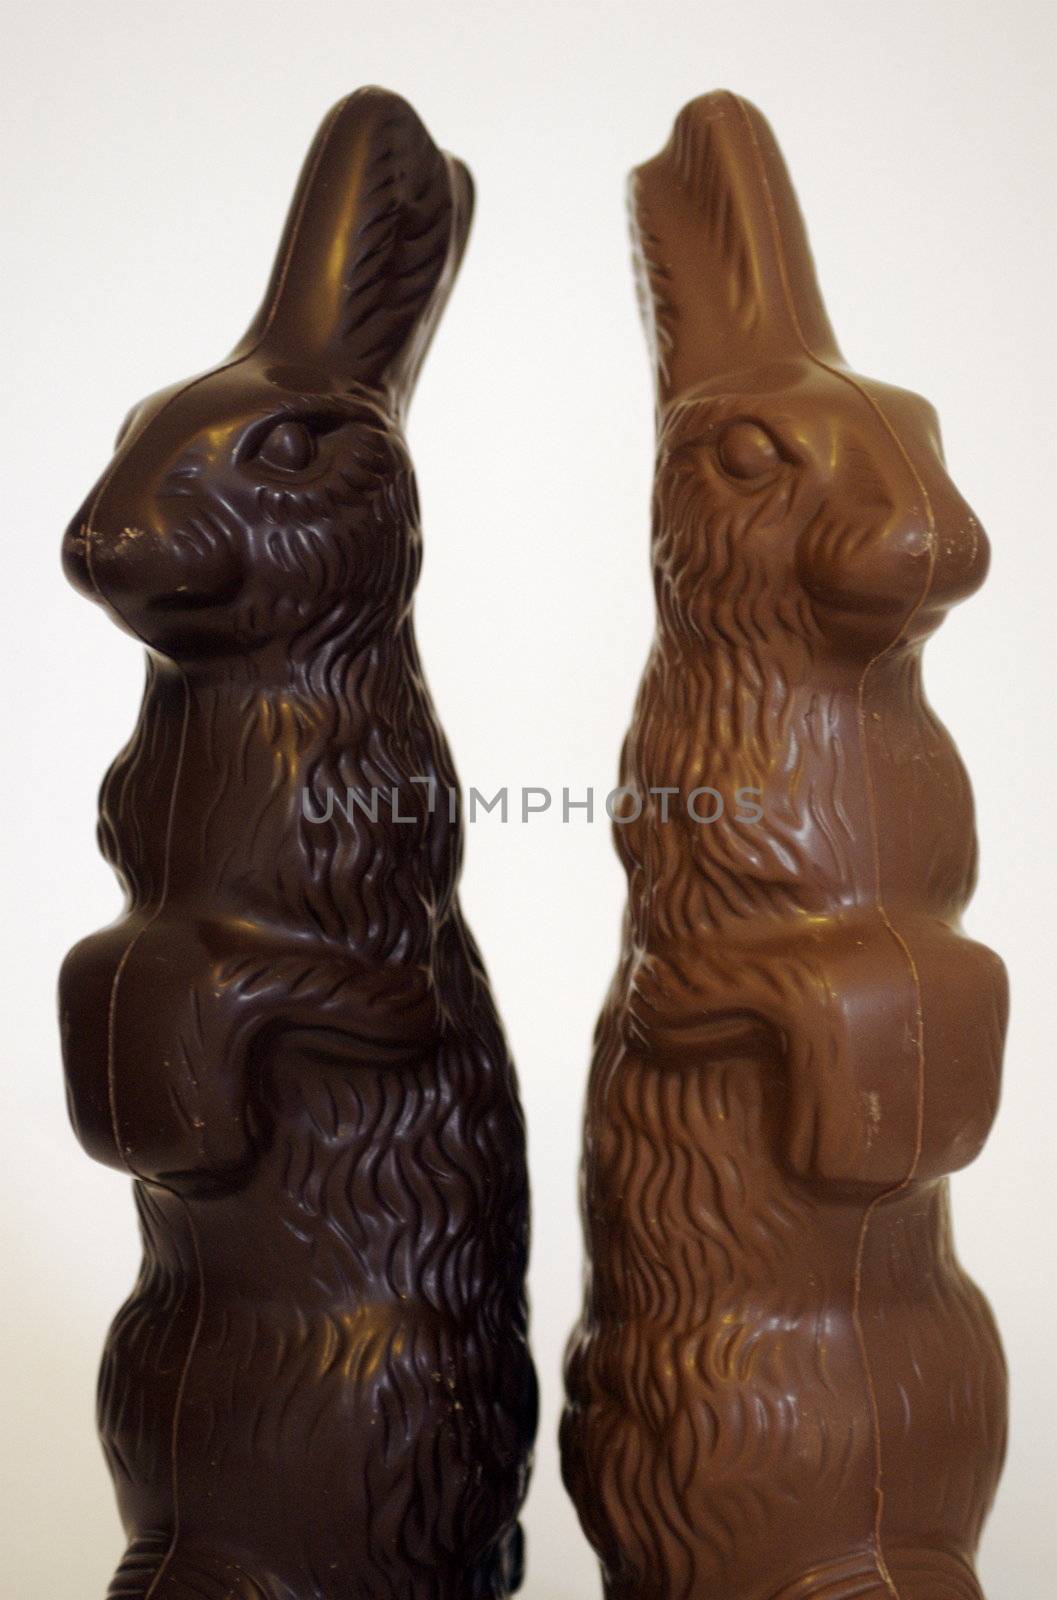 Pair of chocolate easter bunnies (one dark, one milk) back to back, against a white background.